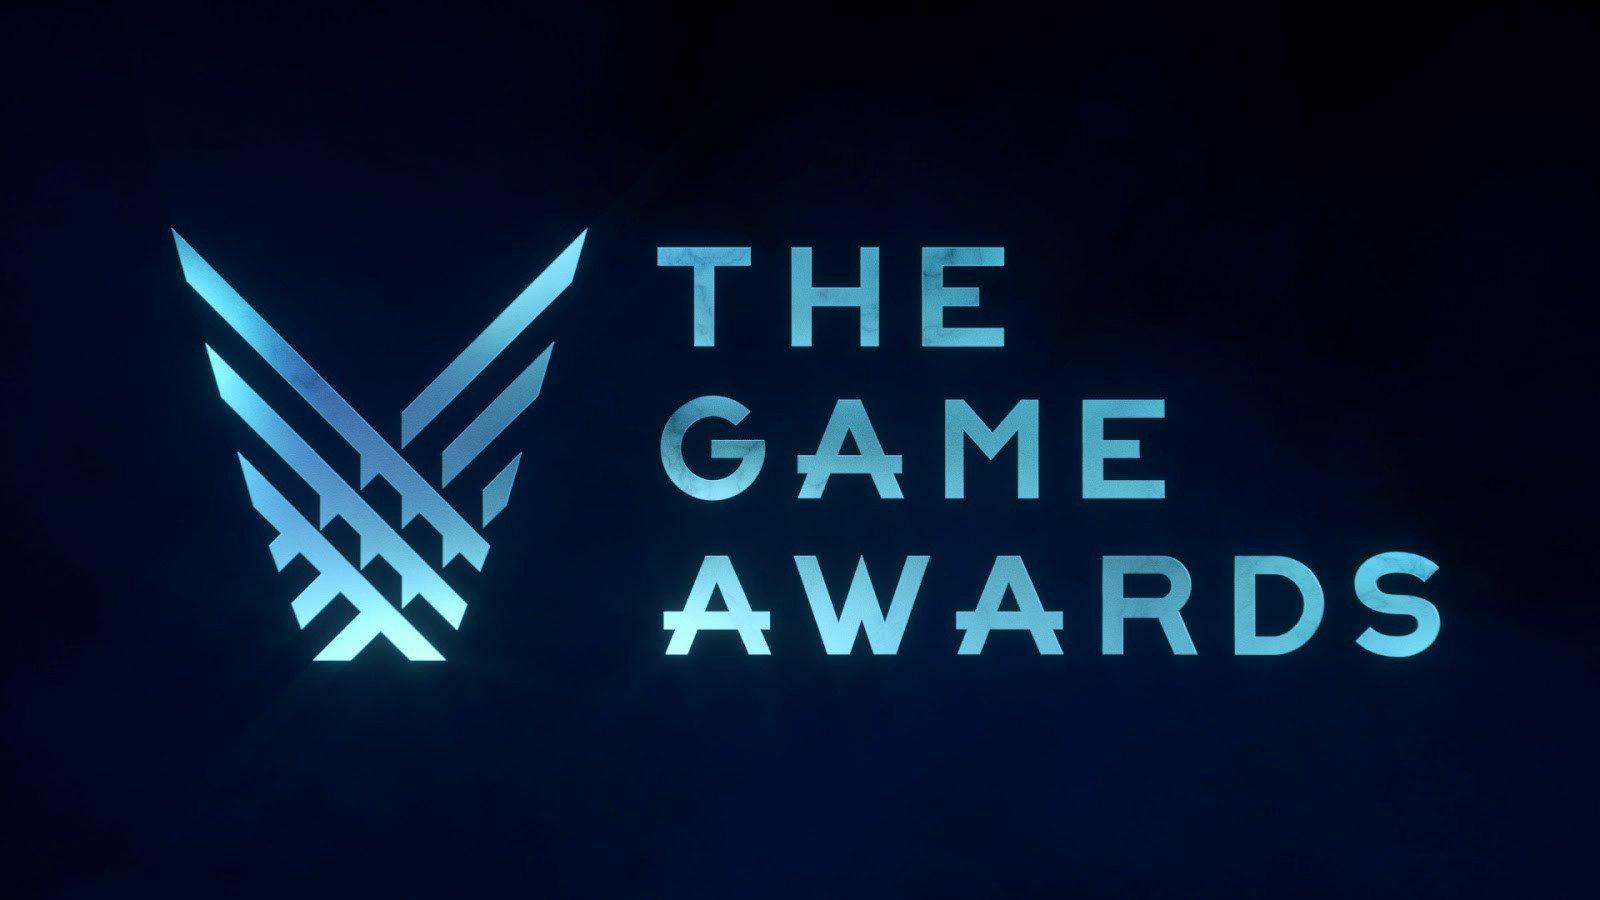 Around 10 New Games to be Revealed at The Game Awards 2019